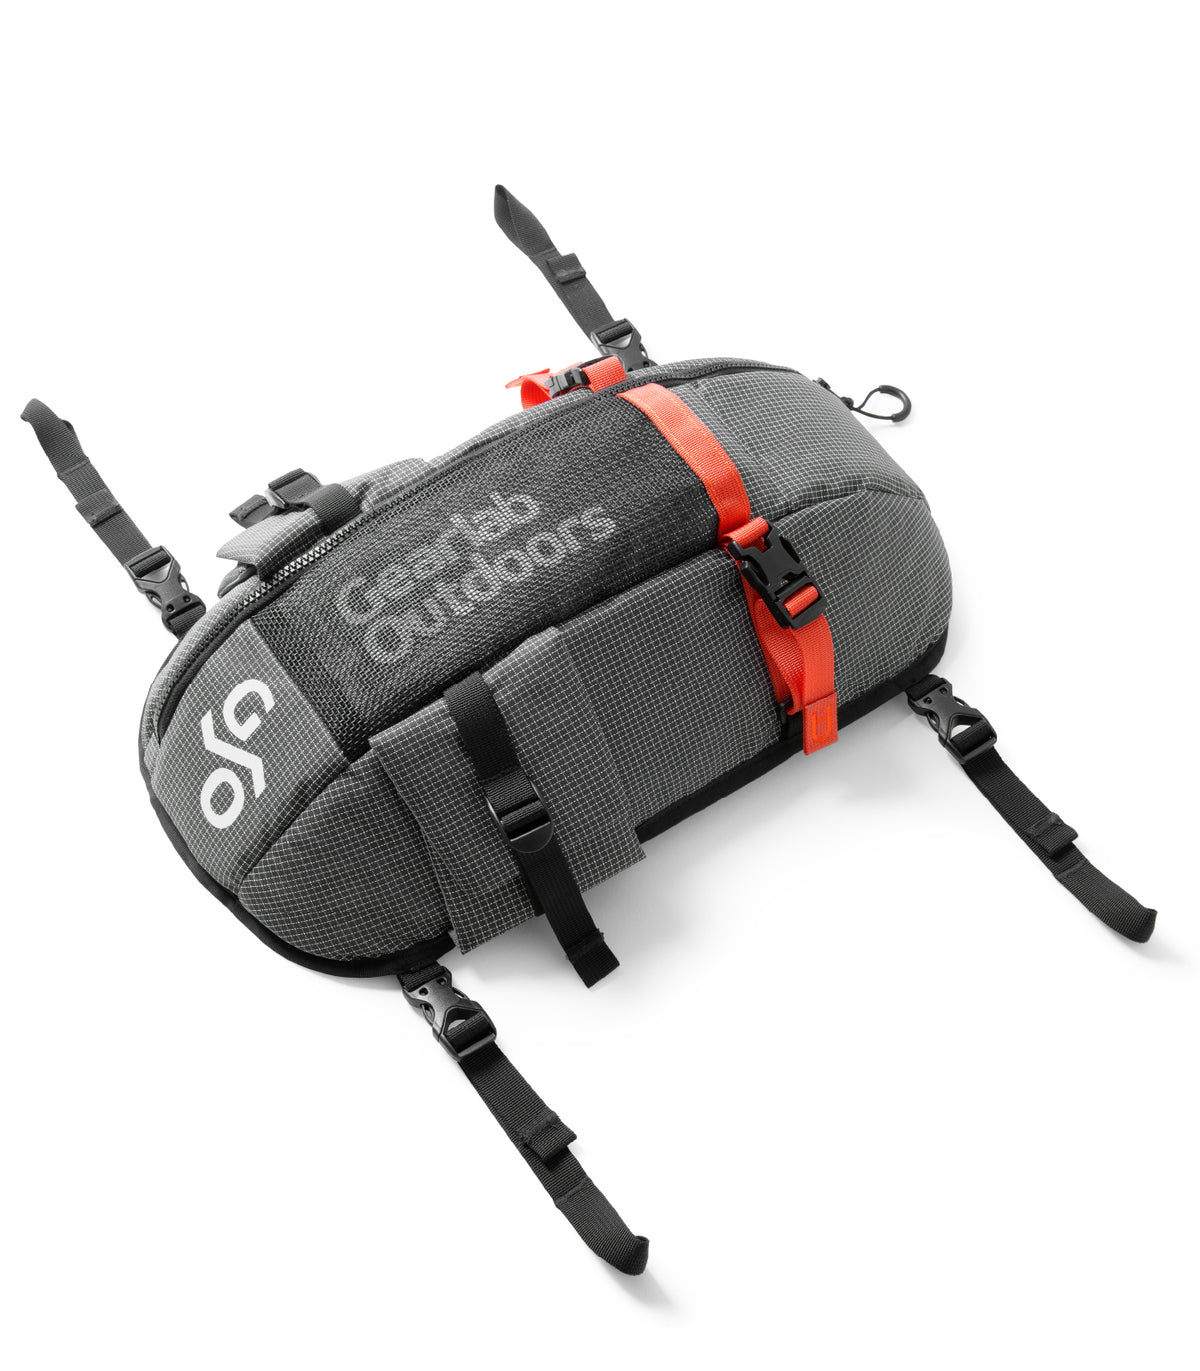 Gearlab Deck Pod - Kayak Deck Bag, Paddling Magazine Award (Holds Paddle Float, Bilge Pump), best kayak deck bag.  Deck Pod carries hydration, snacks, gadgets, and safety equipment organized on deck and close to hand for your kayak trips.